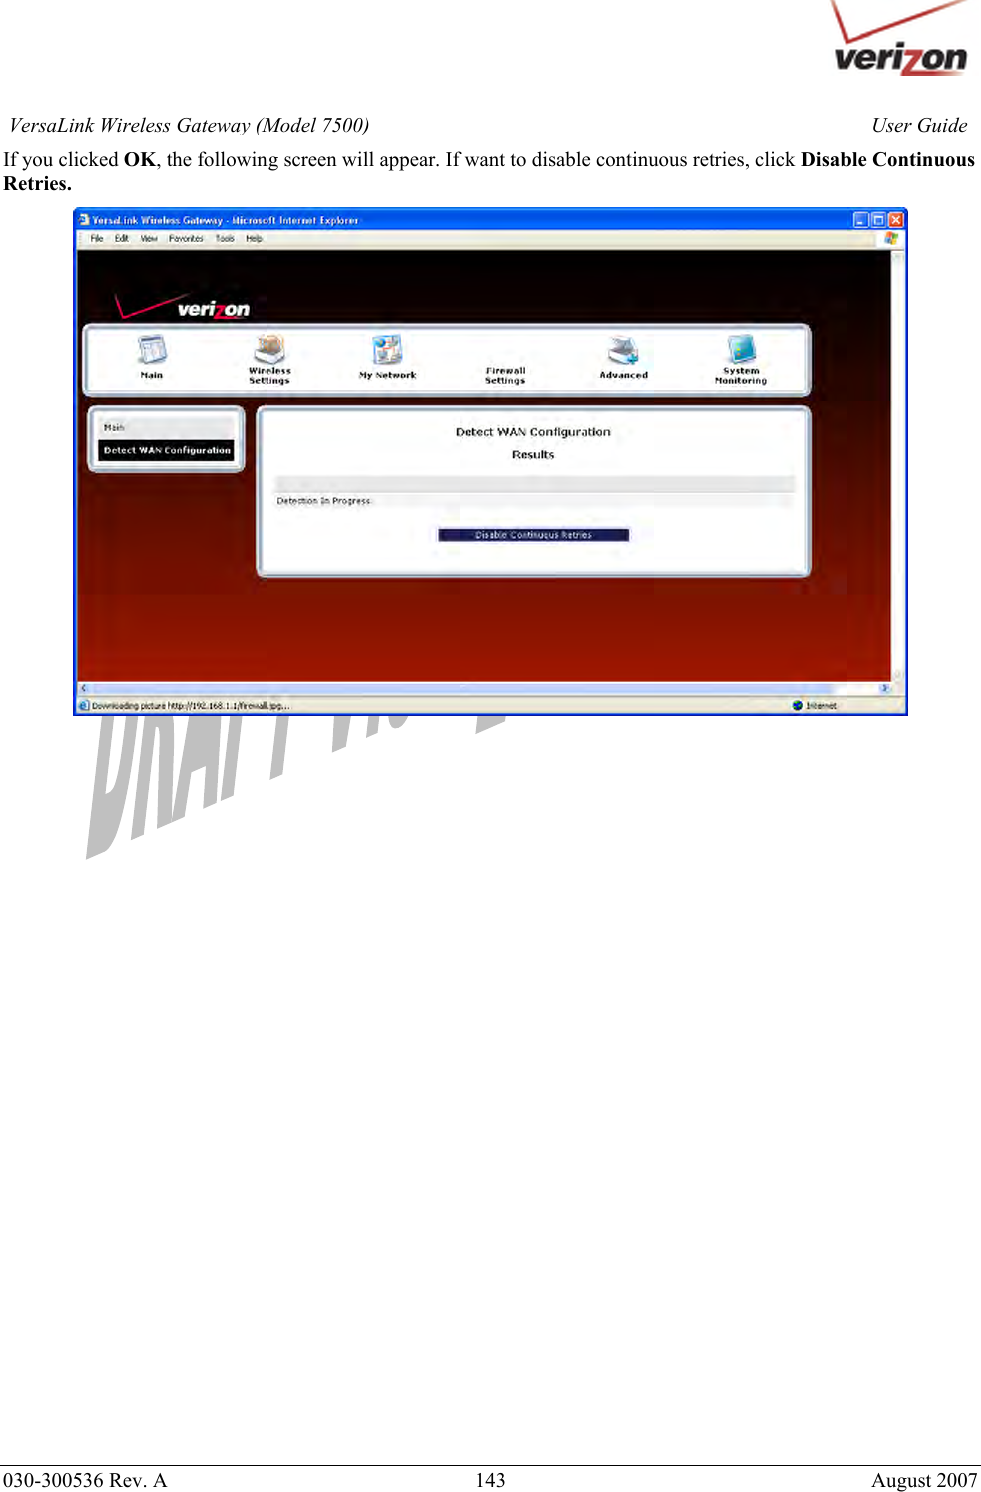       030-300536 Rev. A  143       August 2007 User GuideVersaLink Wireless Gateway (Model 7500)If you clicked OK, the following screen will appear. If want to disable continuous retries, click Disable Continuous Retries.                                